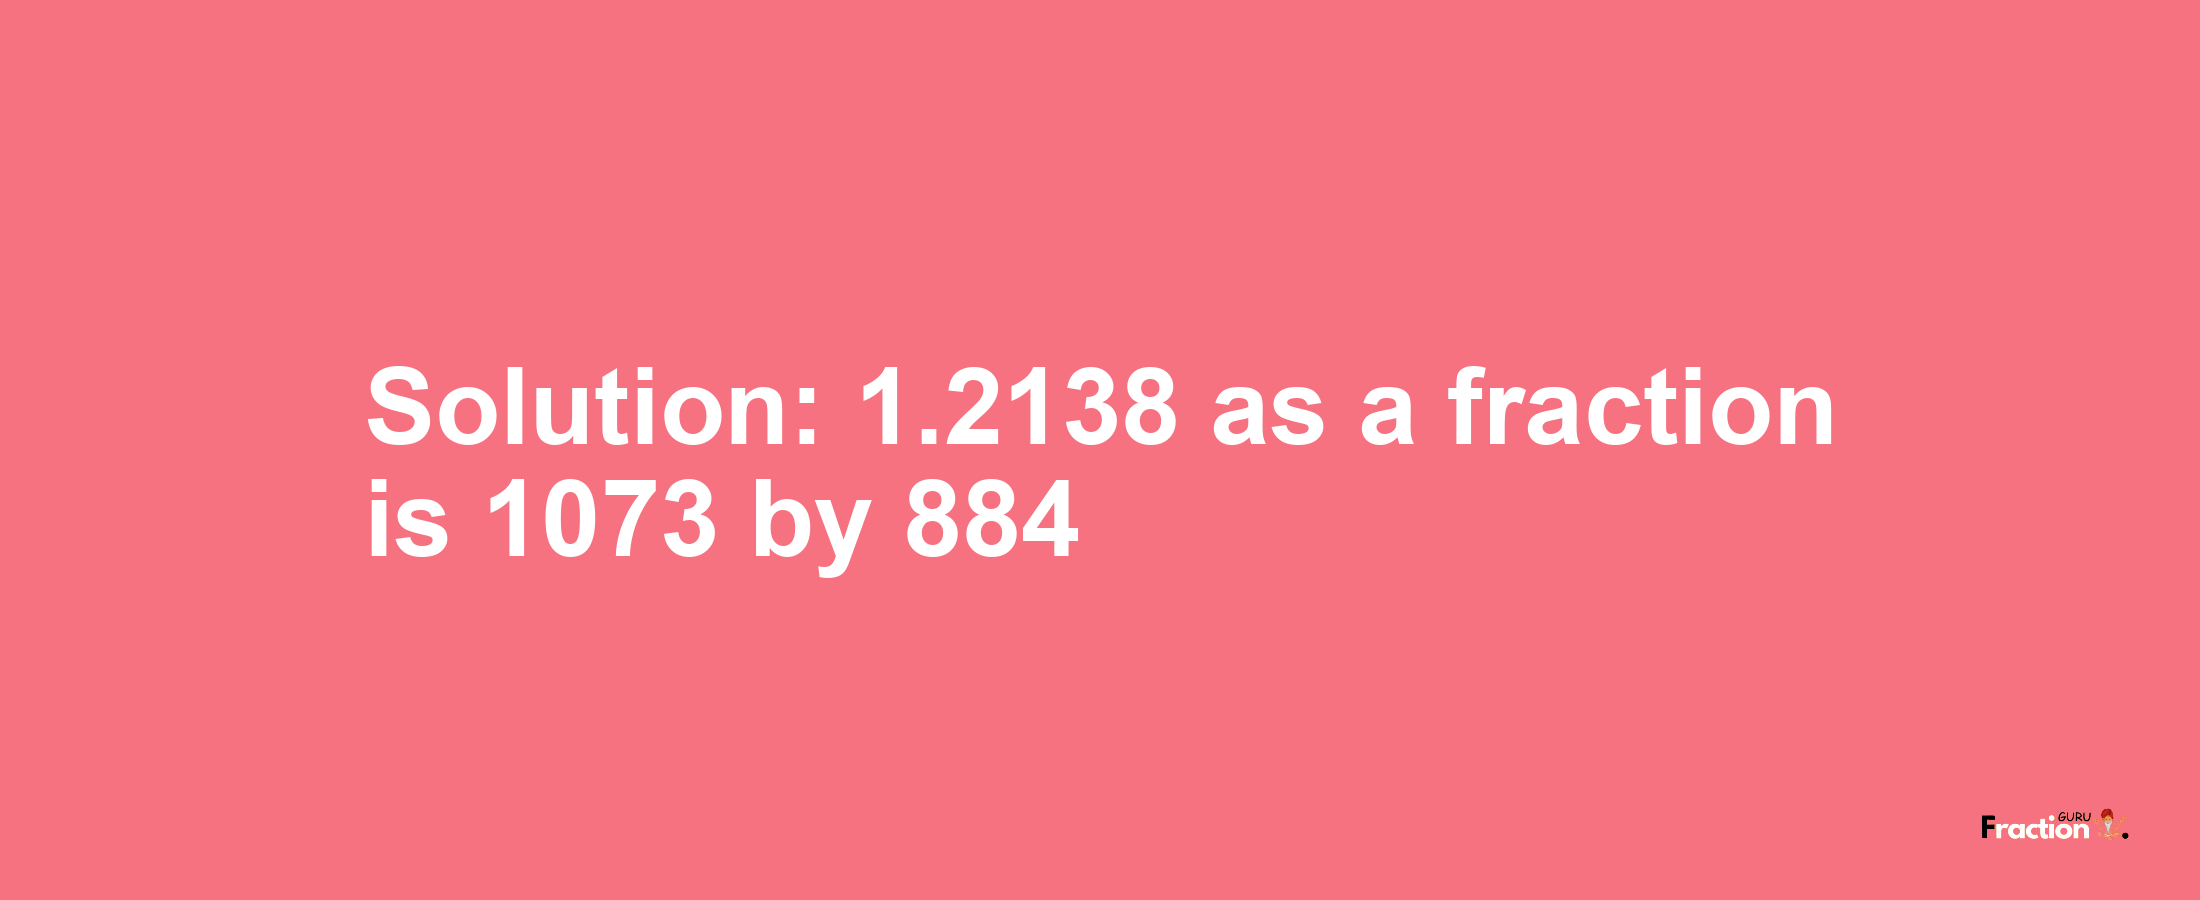 Solution:1.2138 as a fraction is 1073/884